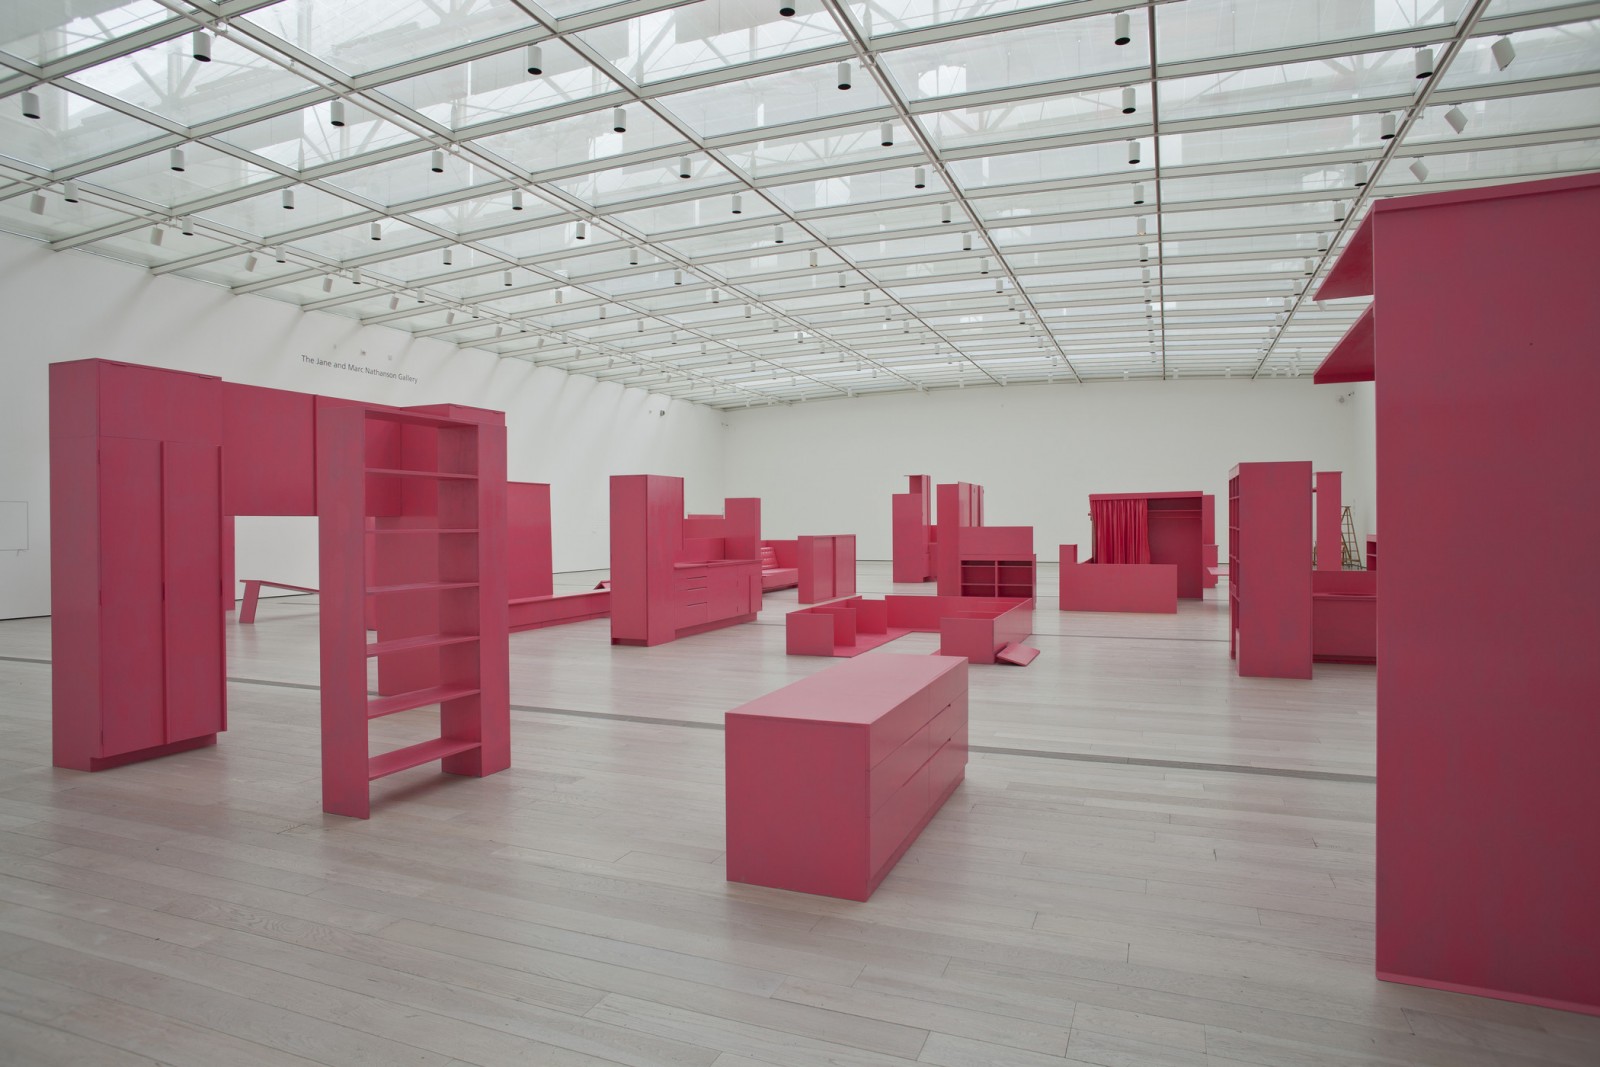 Image: Stephen Prina, As He Remembered It, installation views, Los Angeles County Museum of Art, 2013